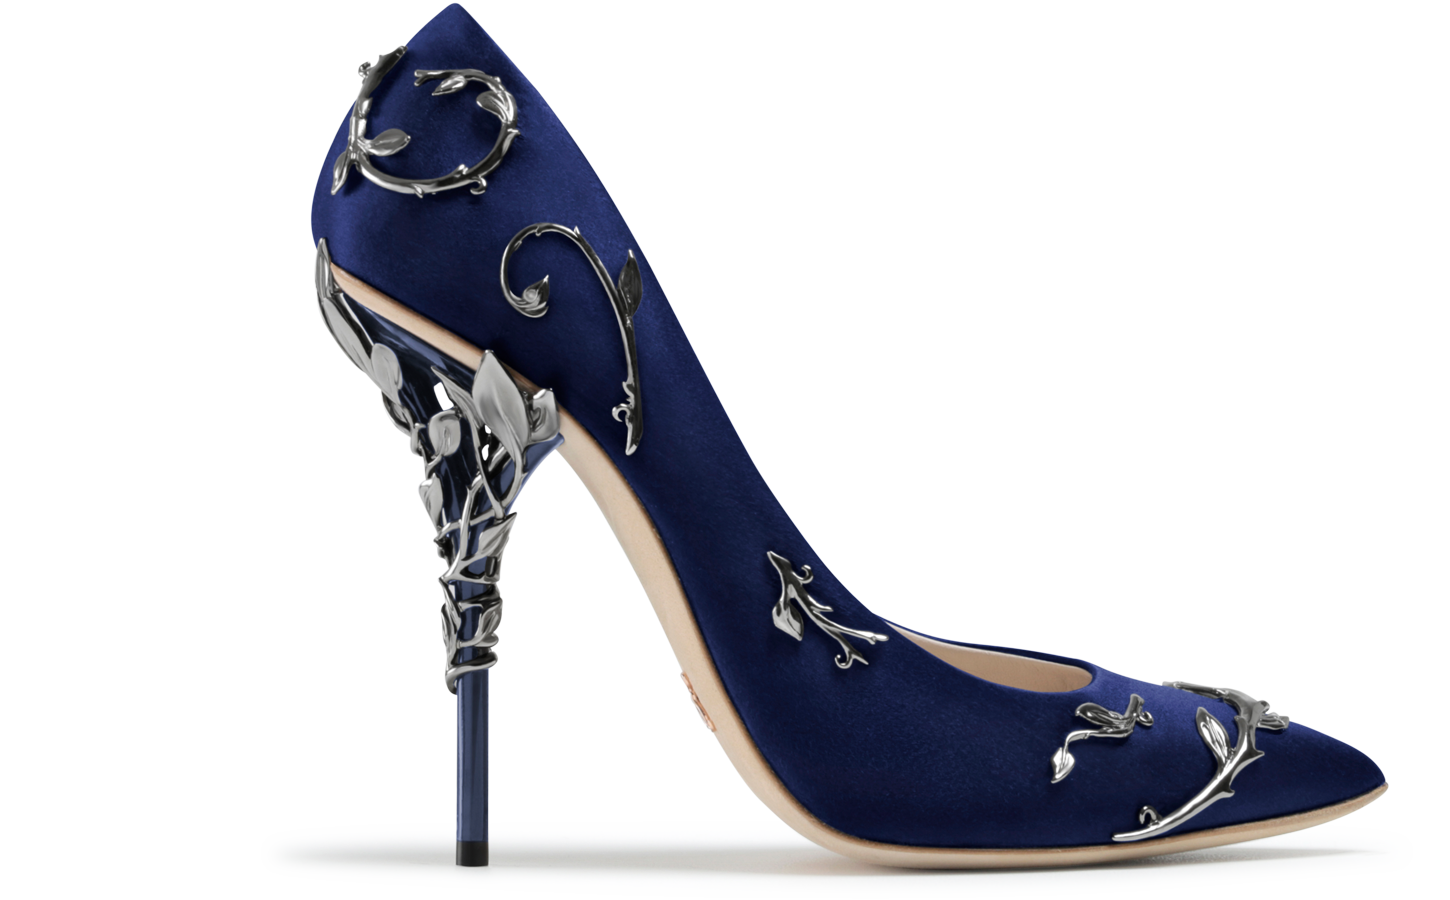 Satin Sandal Picture PNG Image